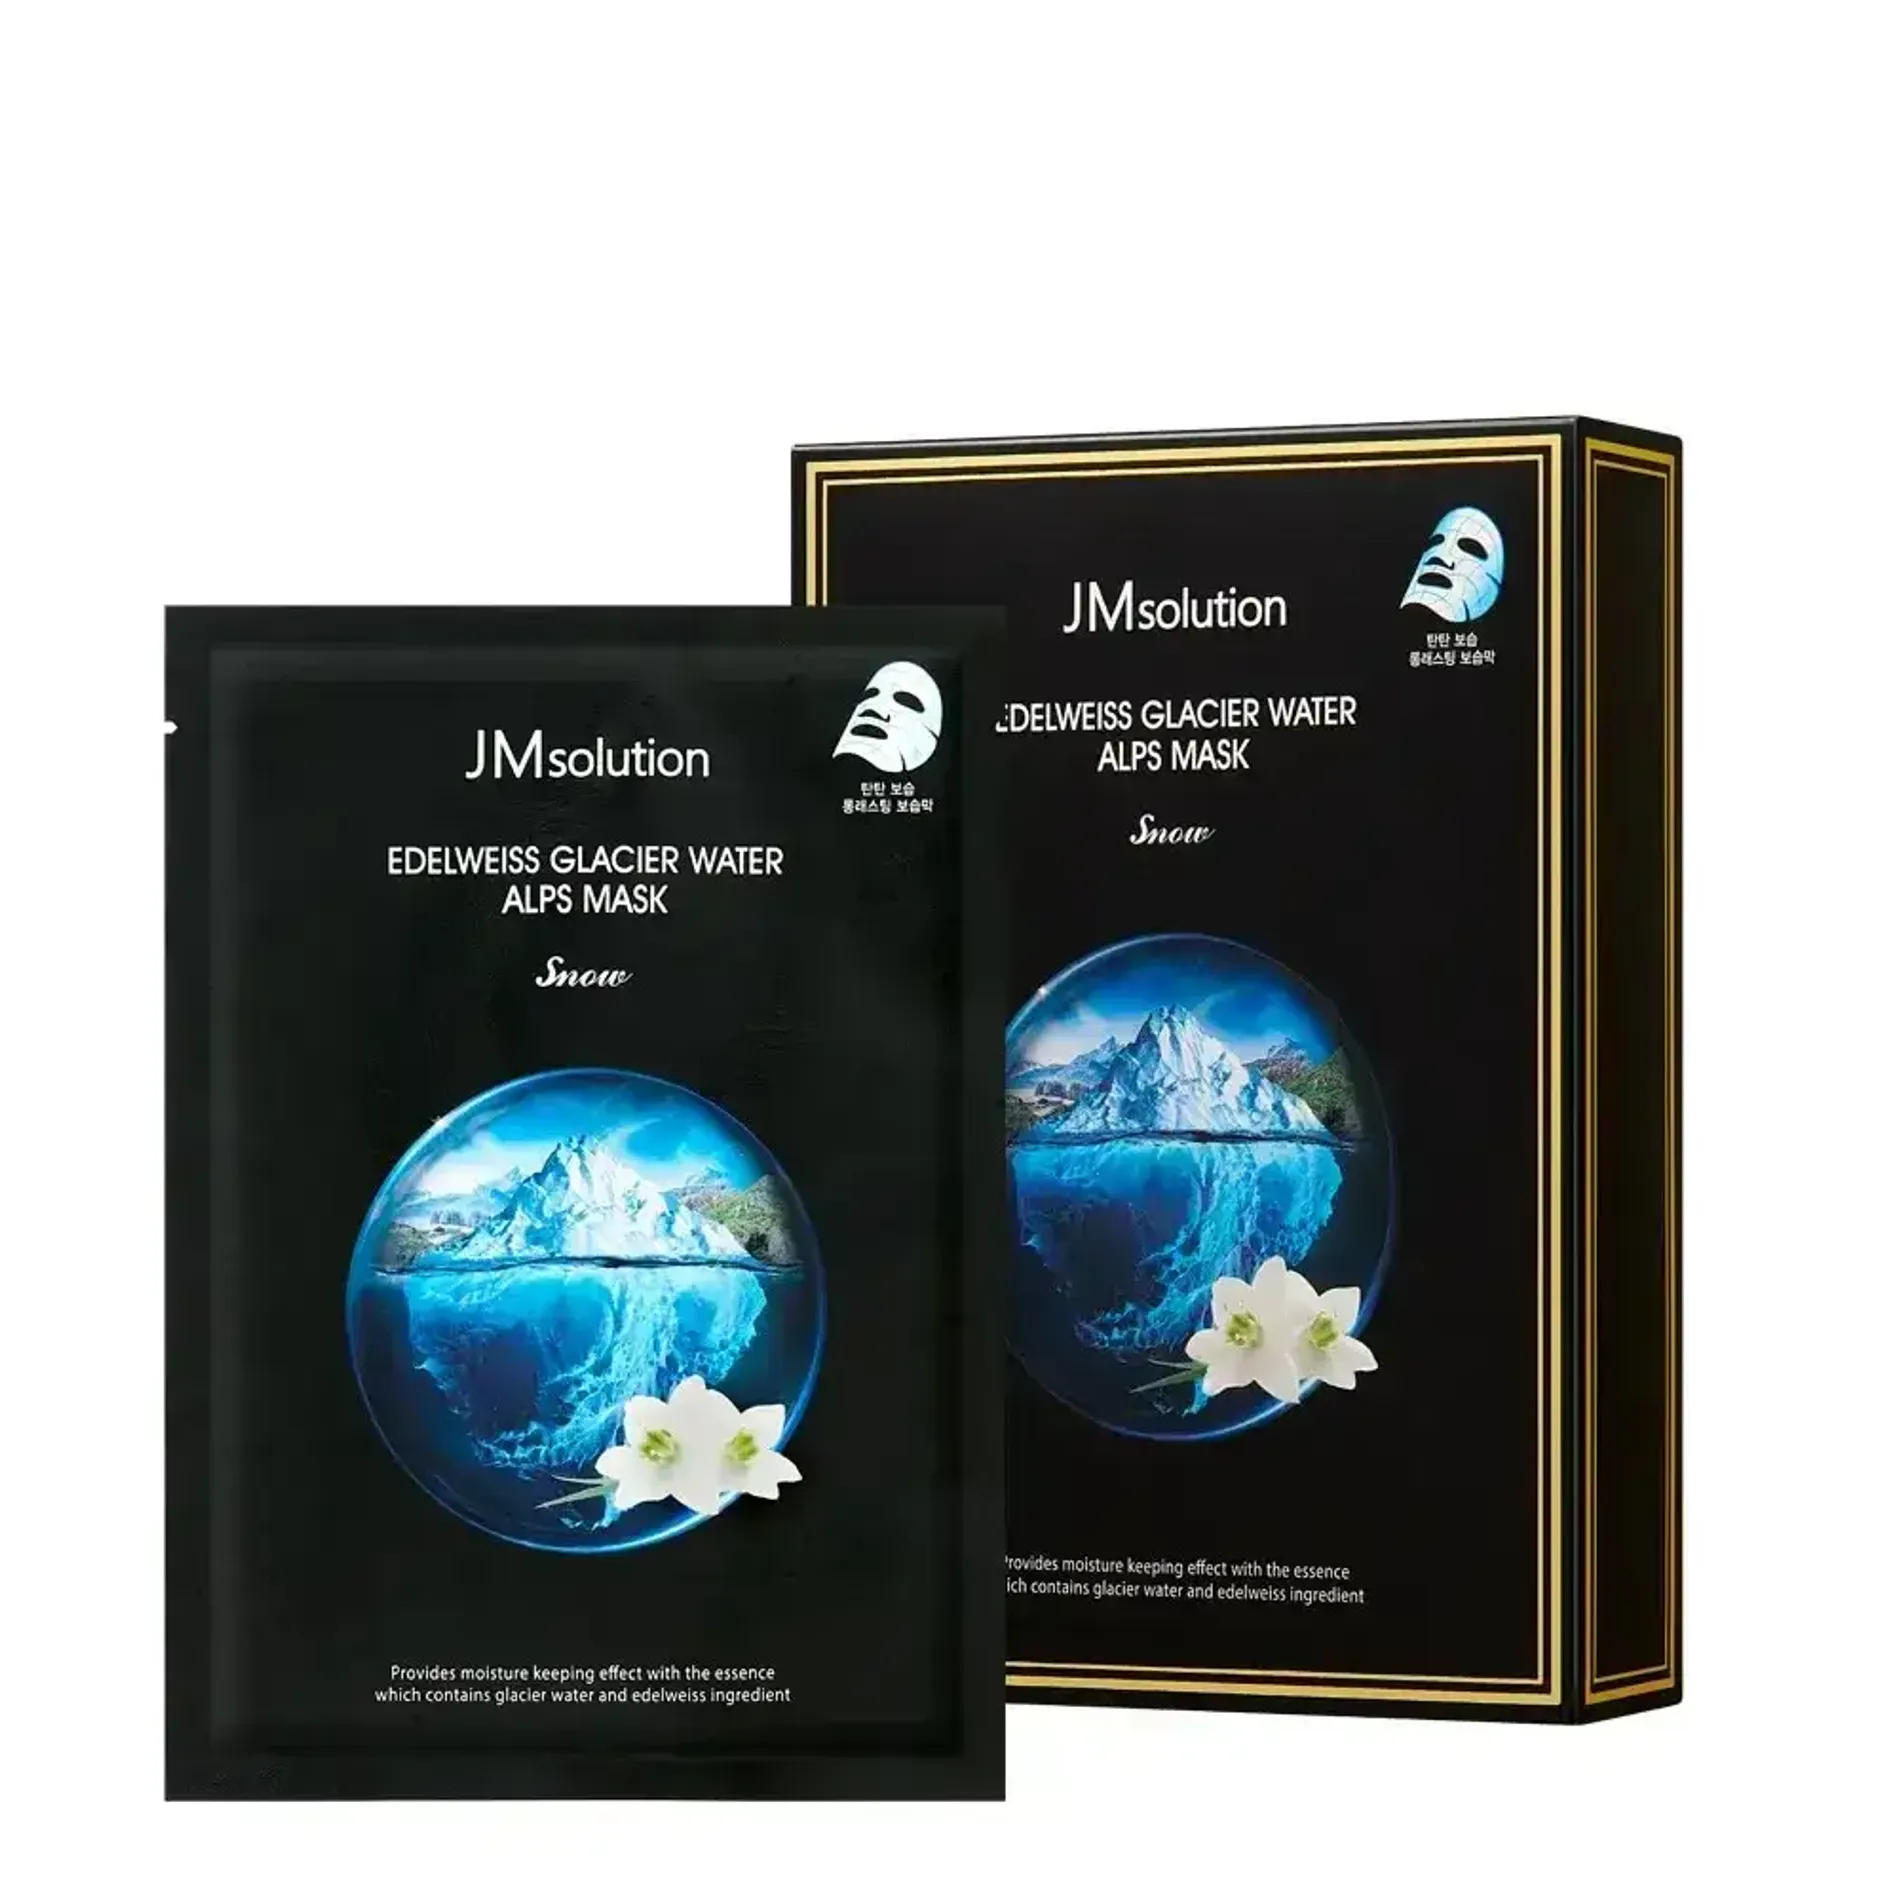 mat-na-giay-duong-am-jmsolution-edelweiss-glacier-water-alps-mask-30ml-2